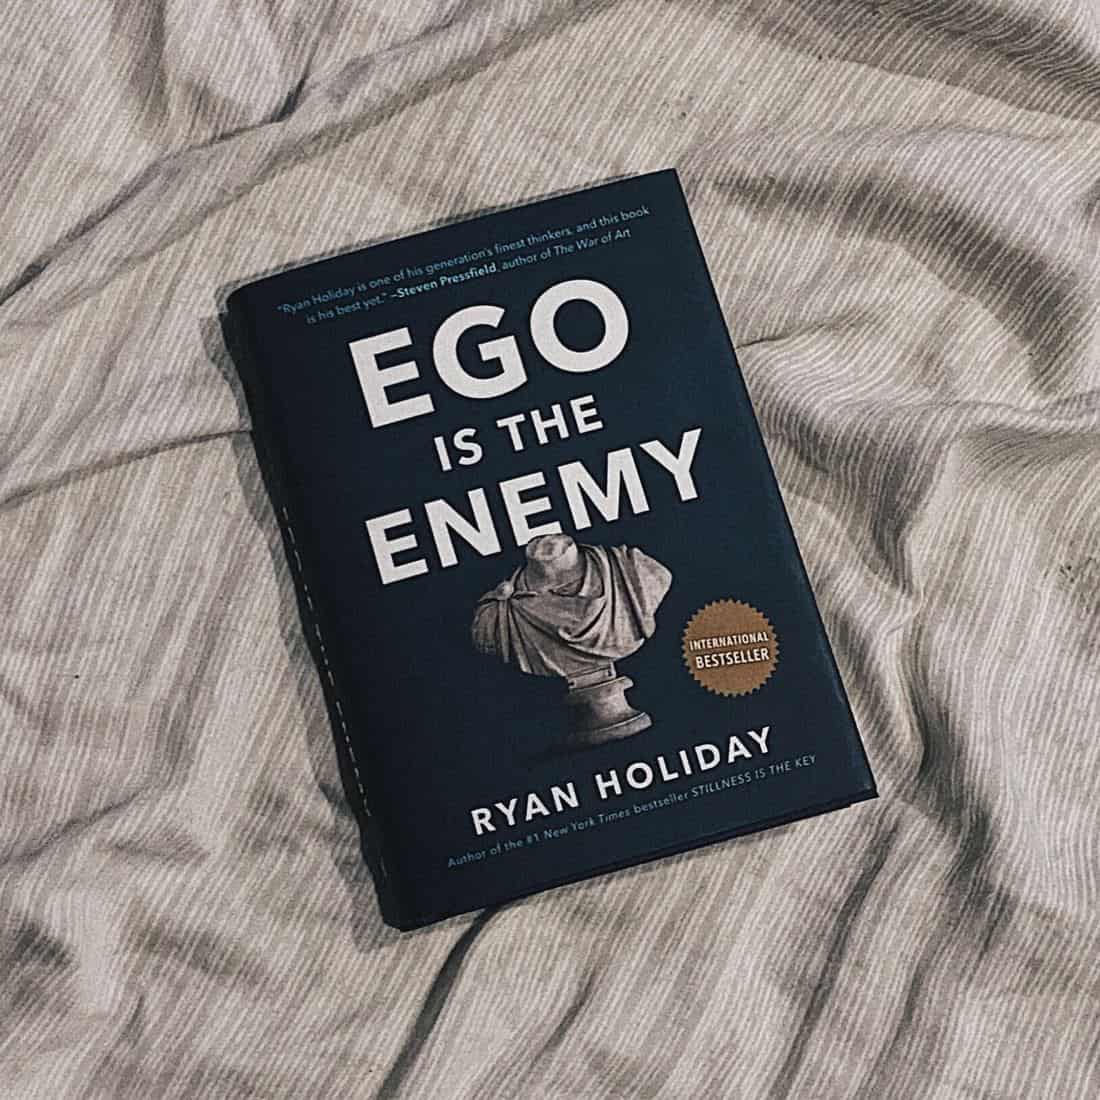 ryan holiday ego is the enemy book list